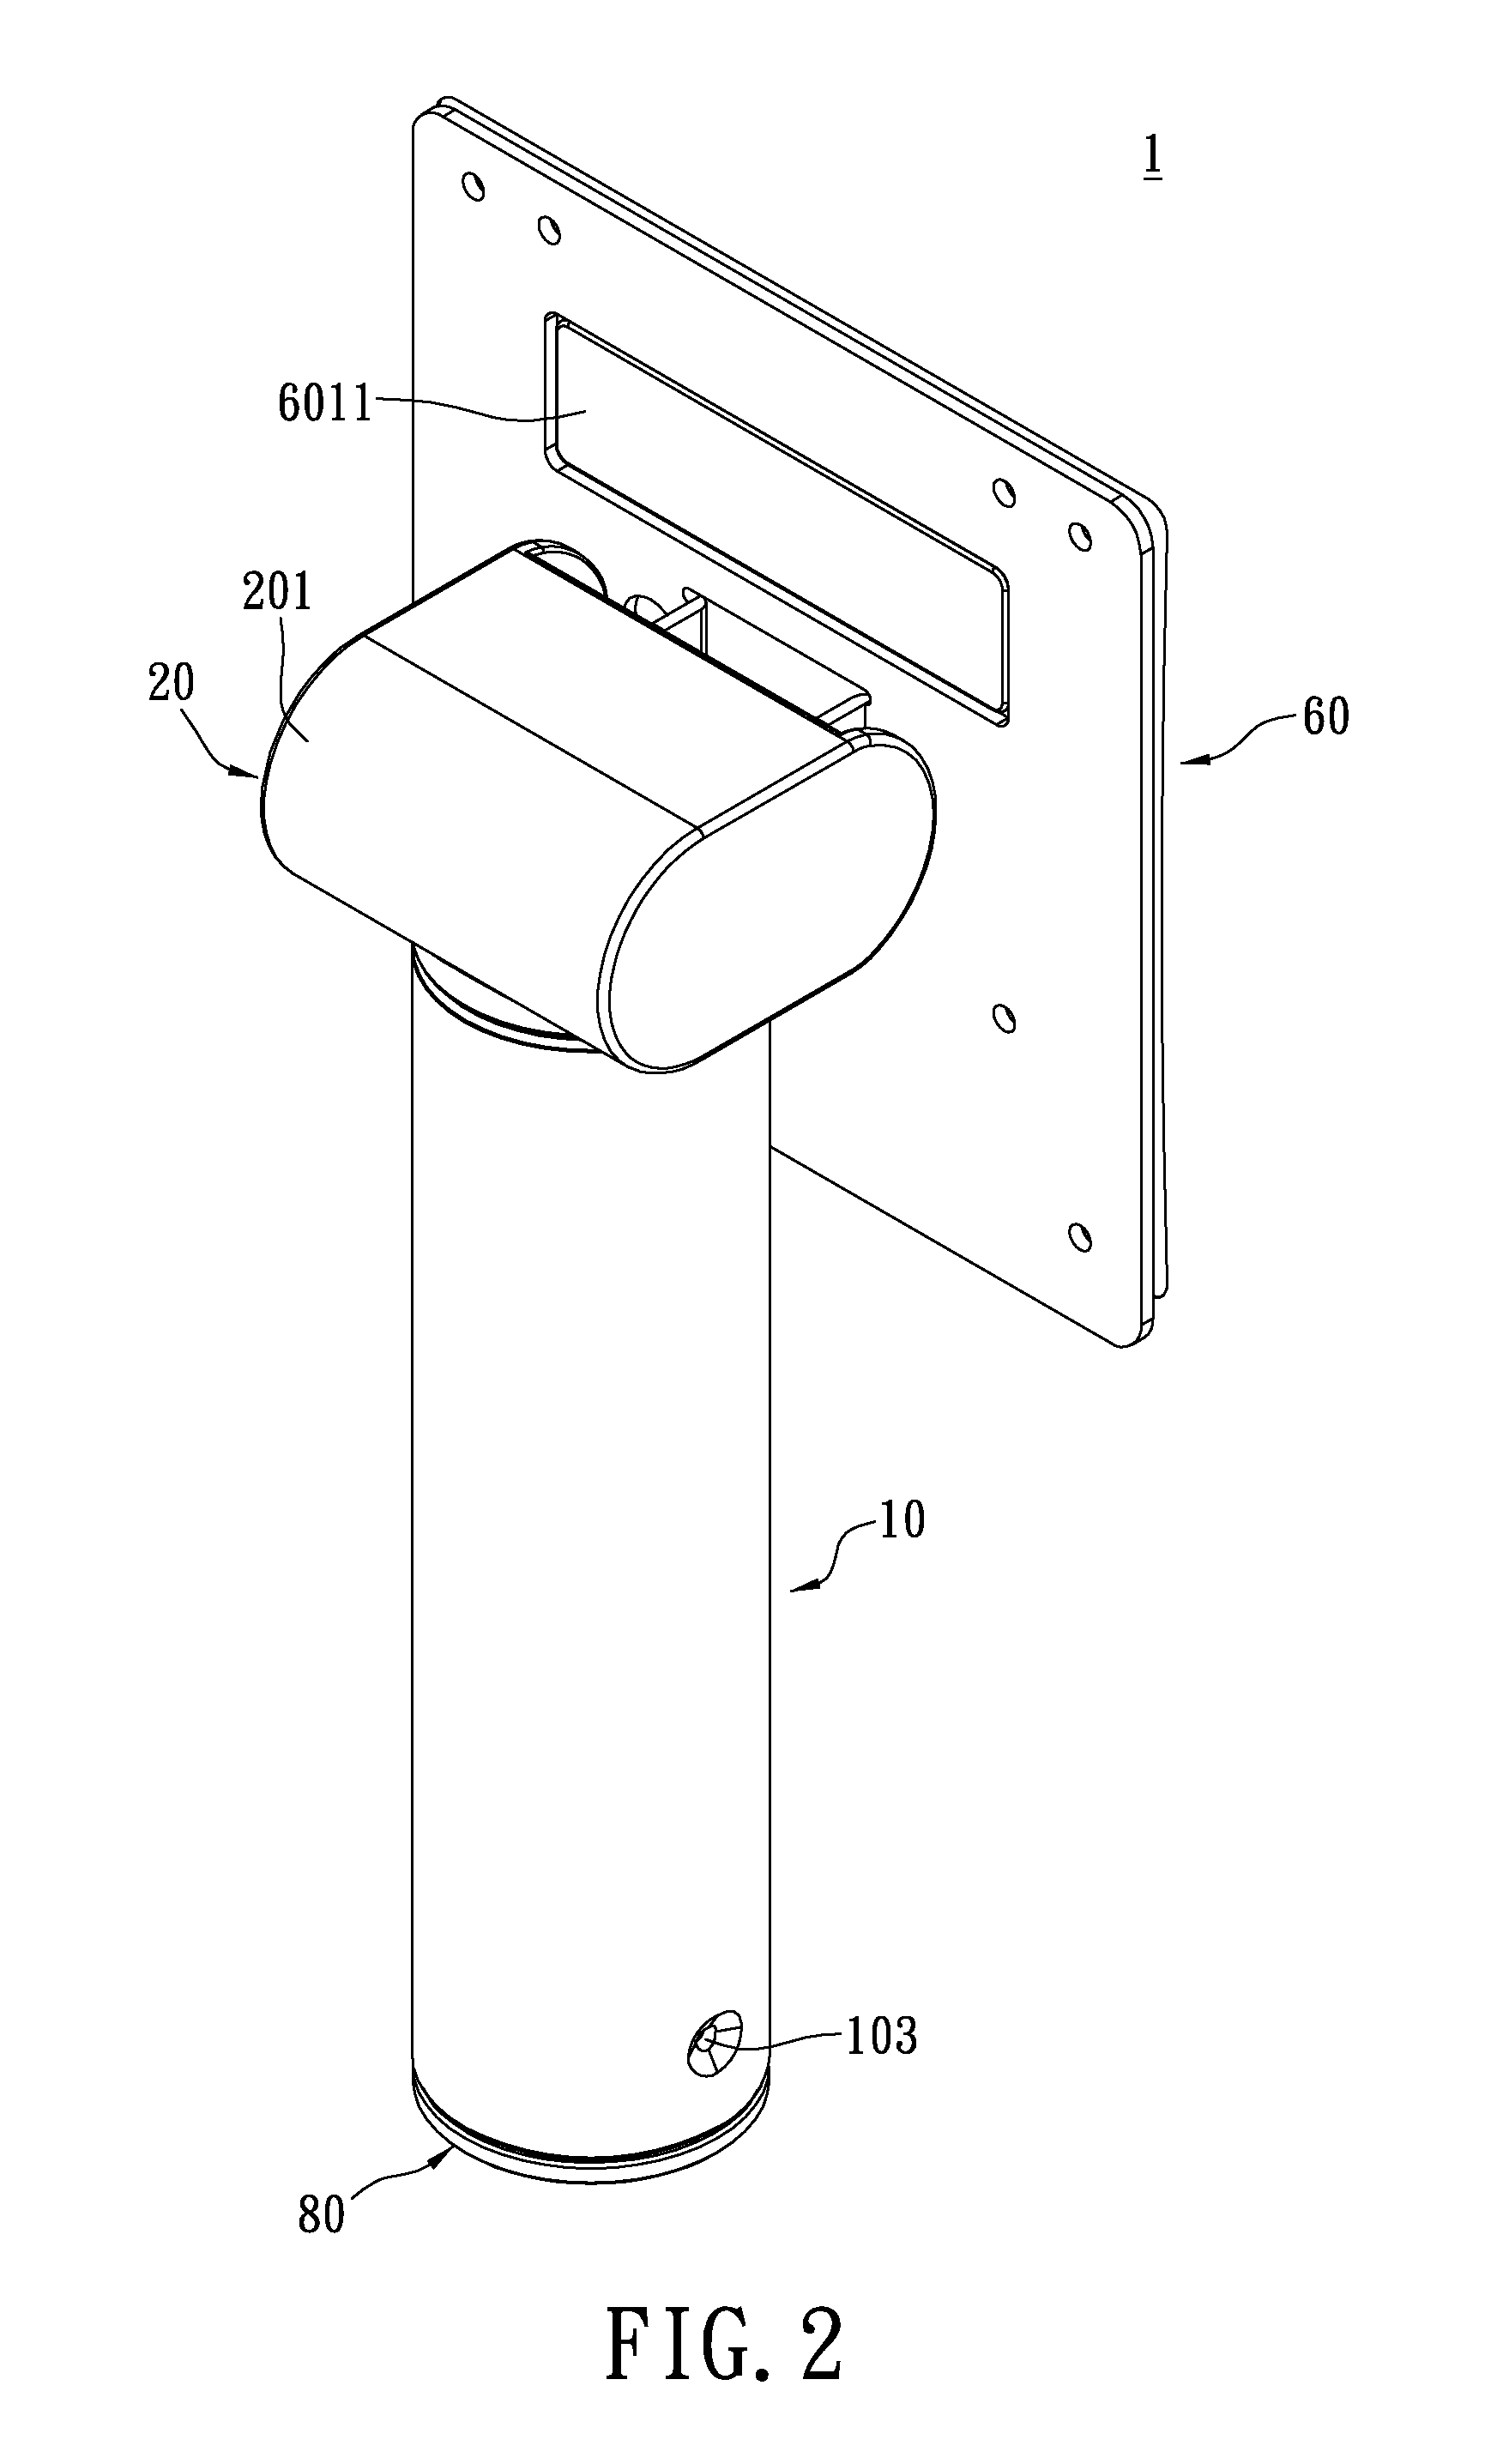 Display supporting device